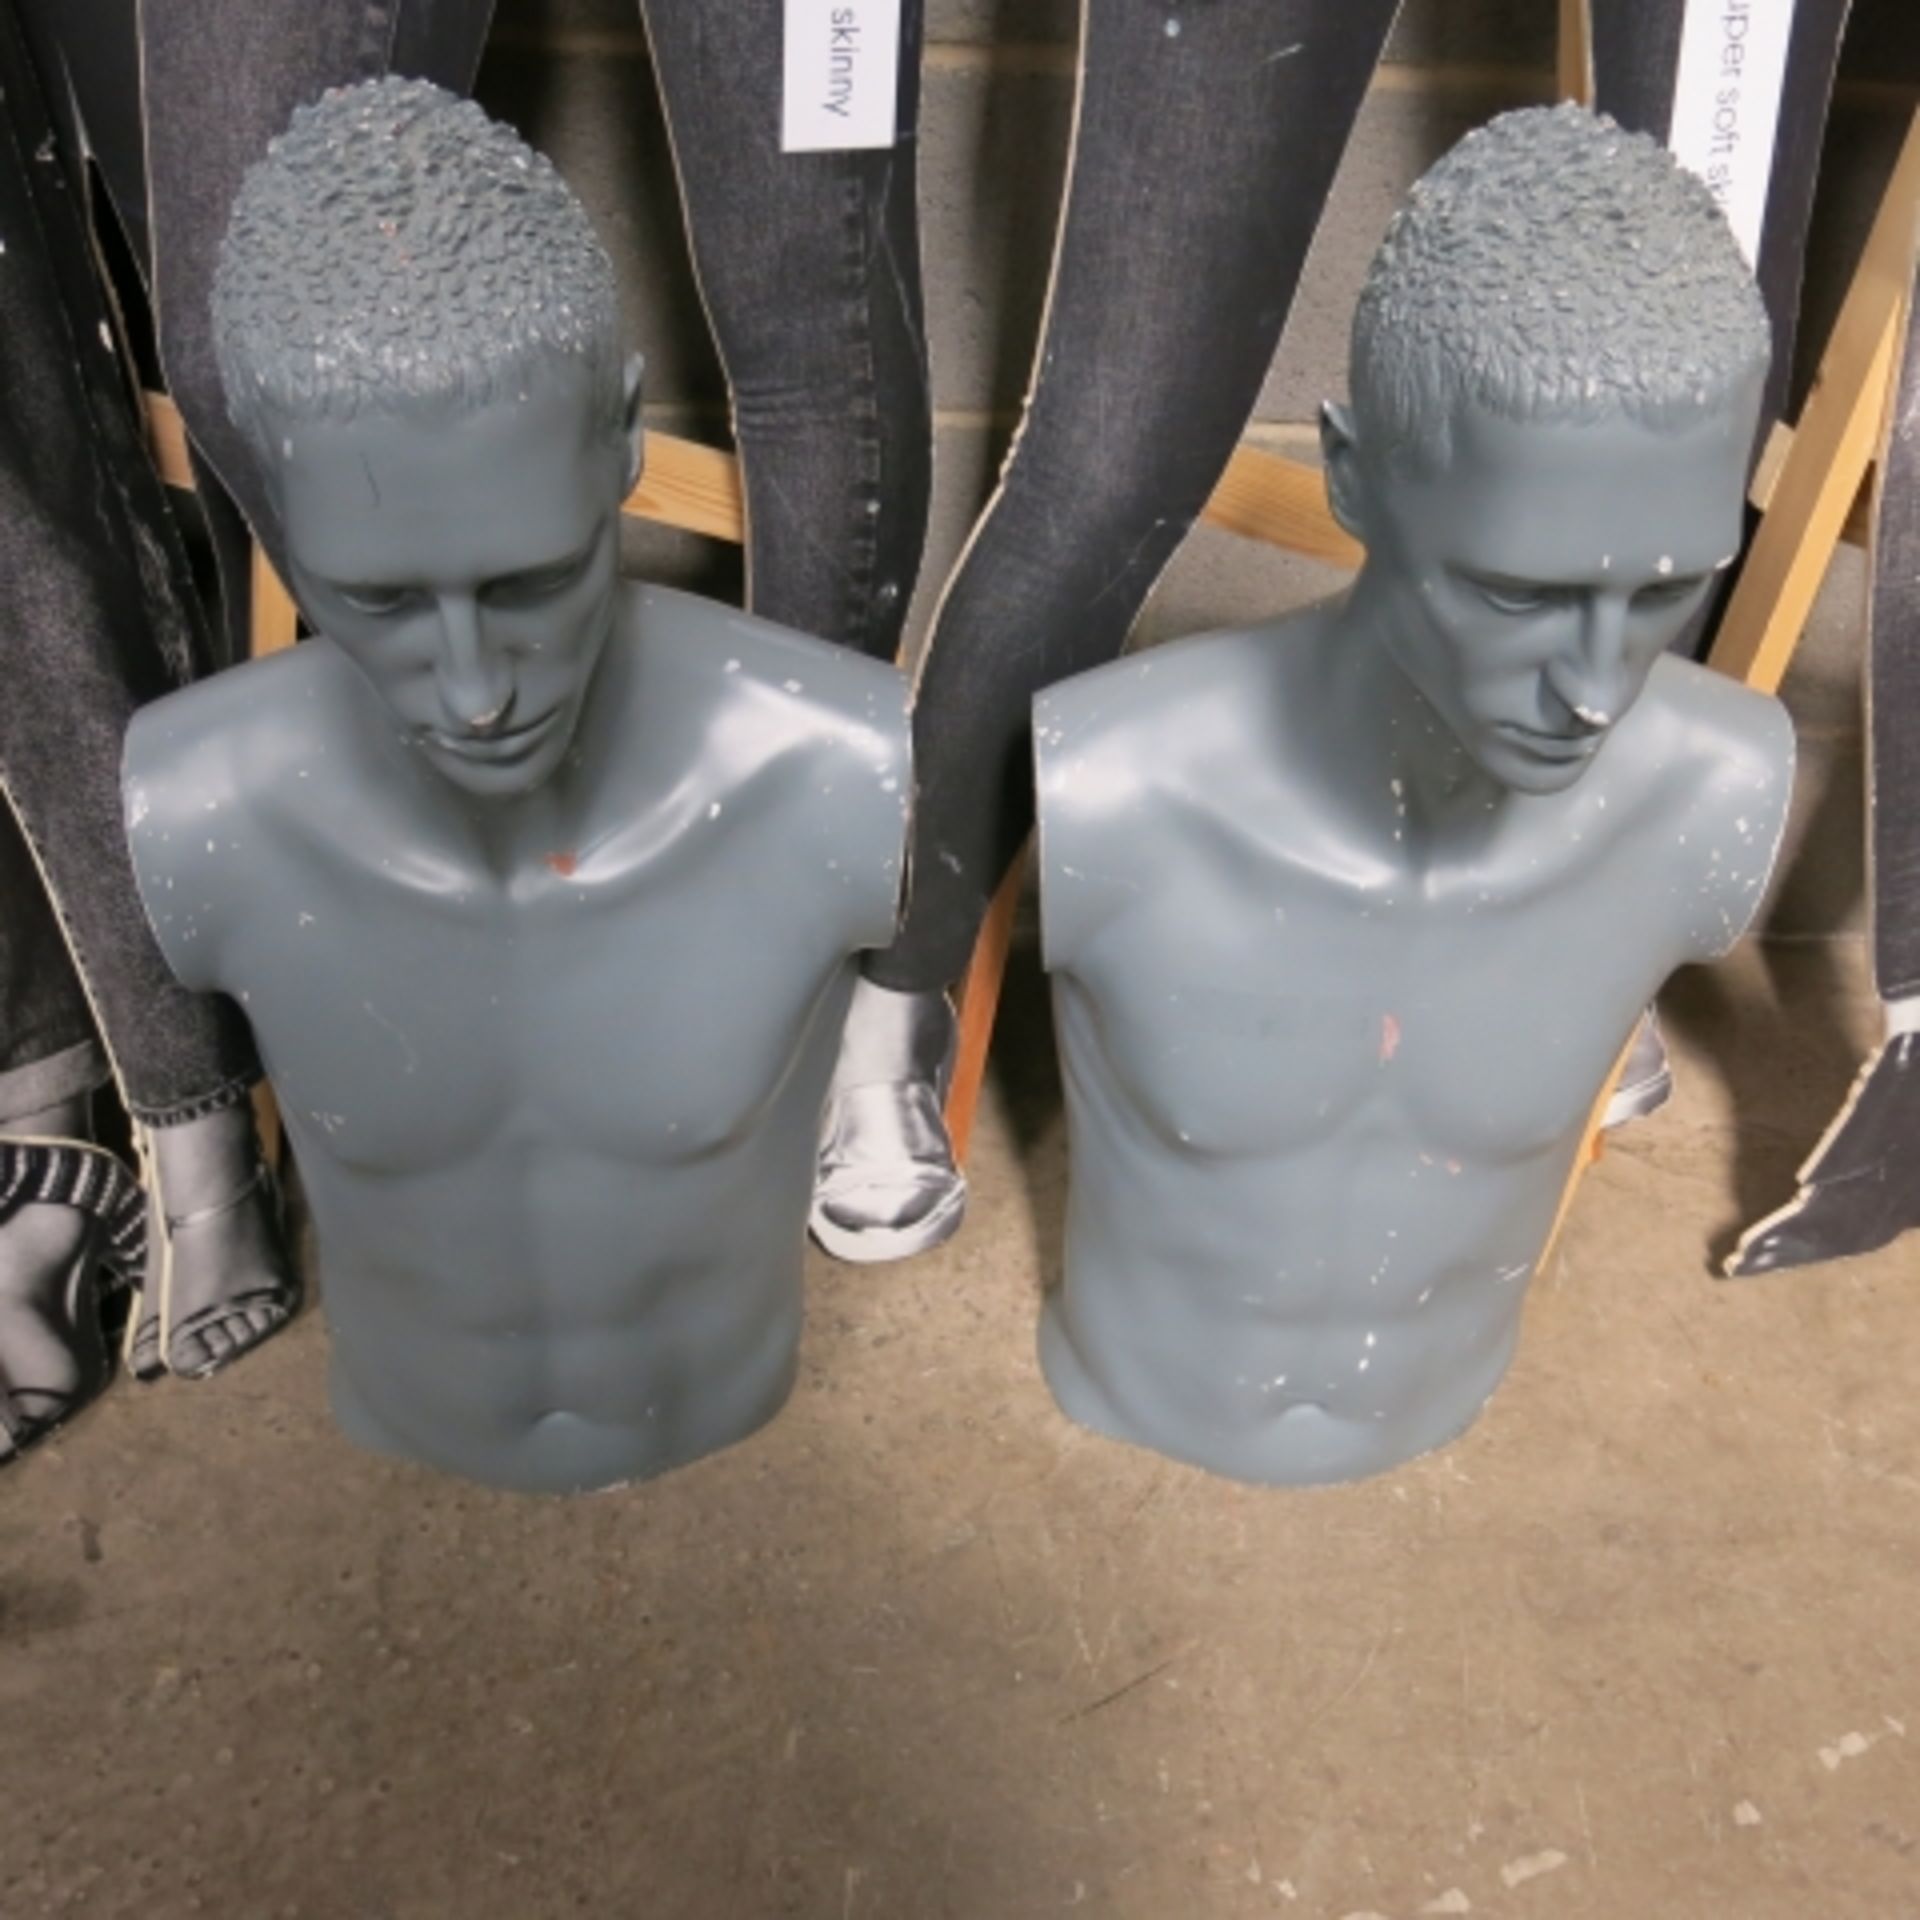 2 x Male mannequins and a selection of other shop displays - Image 3 of 3